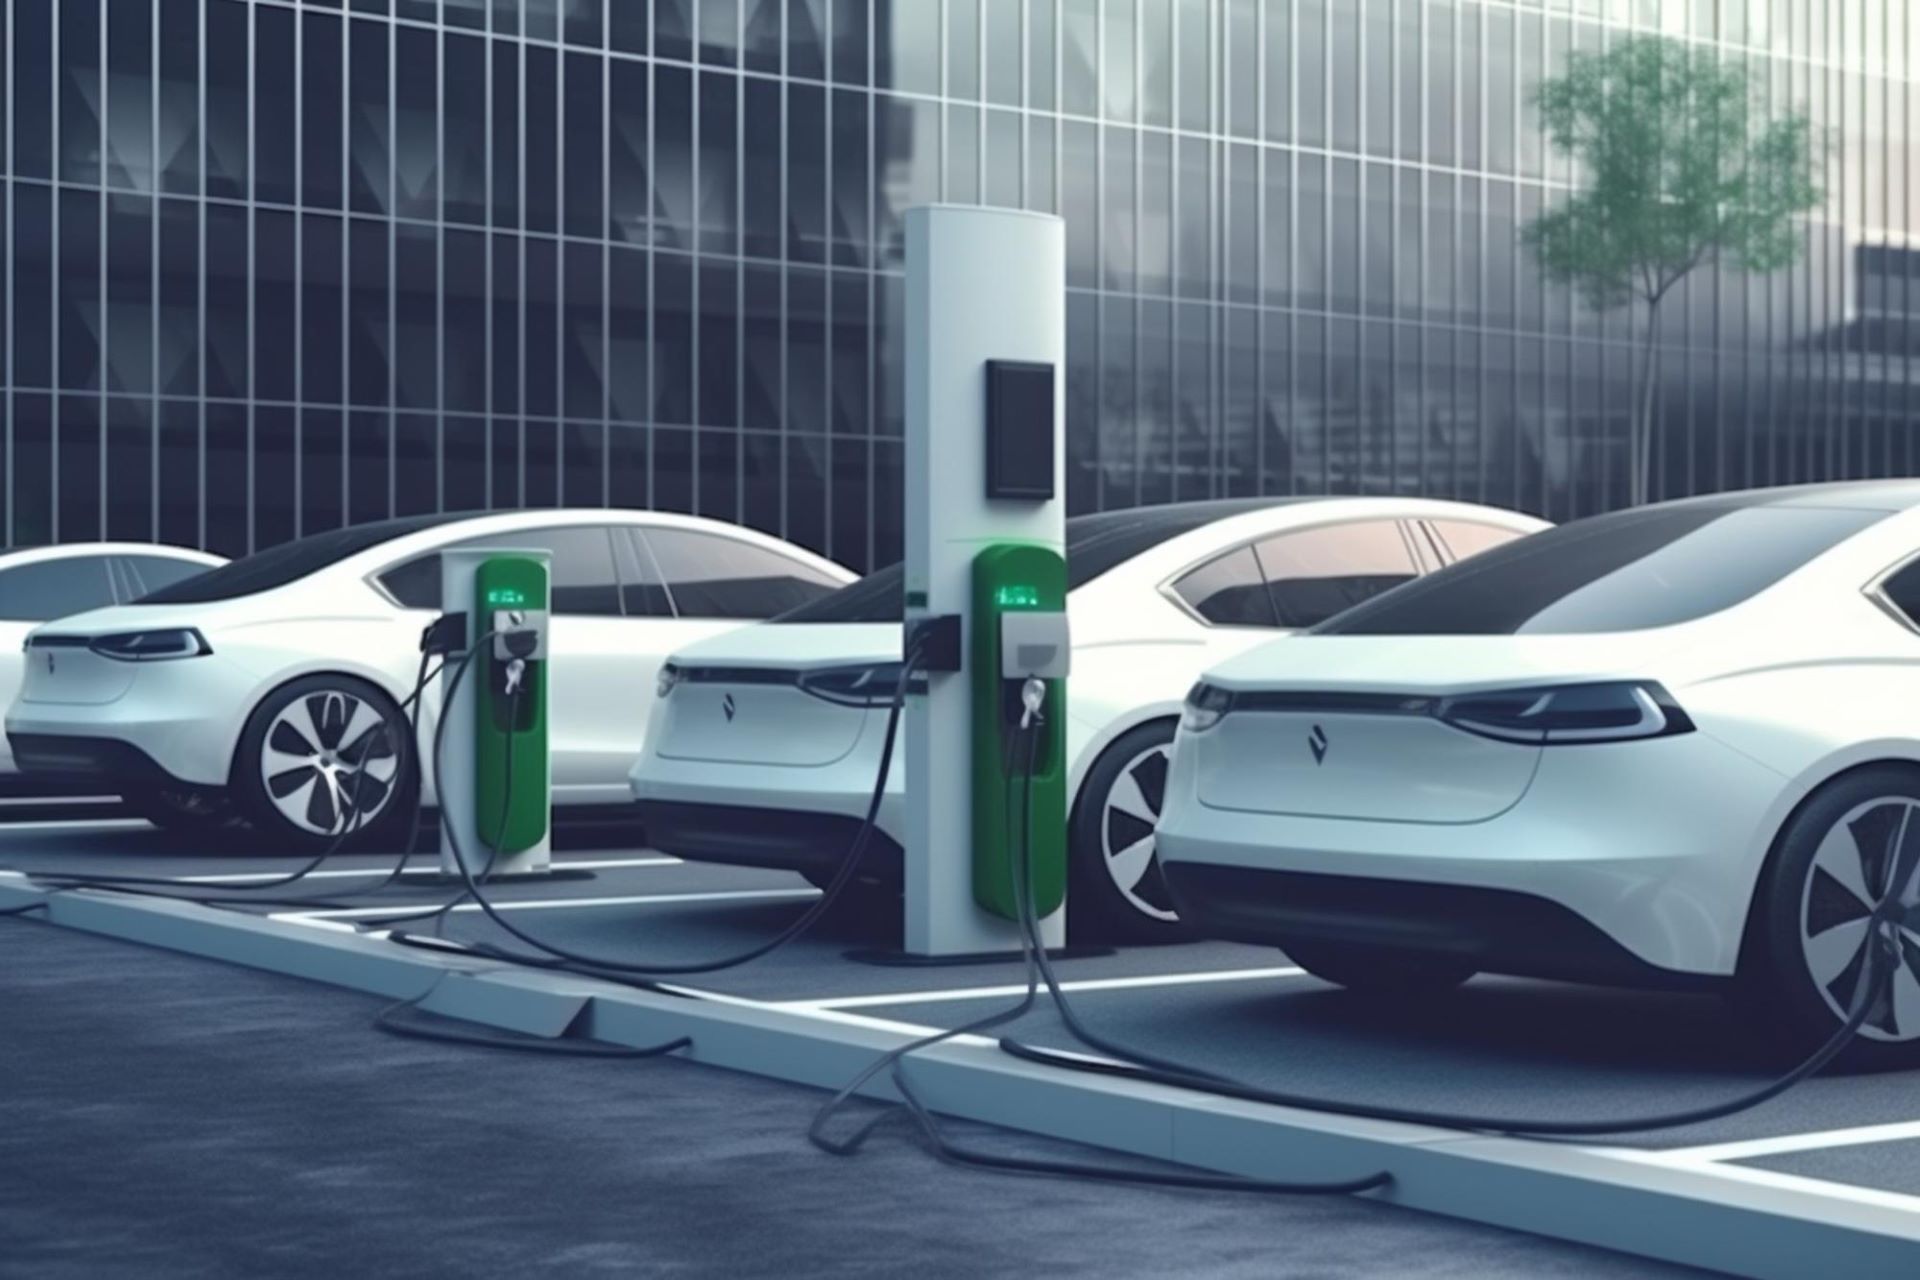 ev-charging-stations-a-boon-for-real-estate-developers